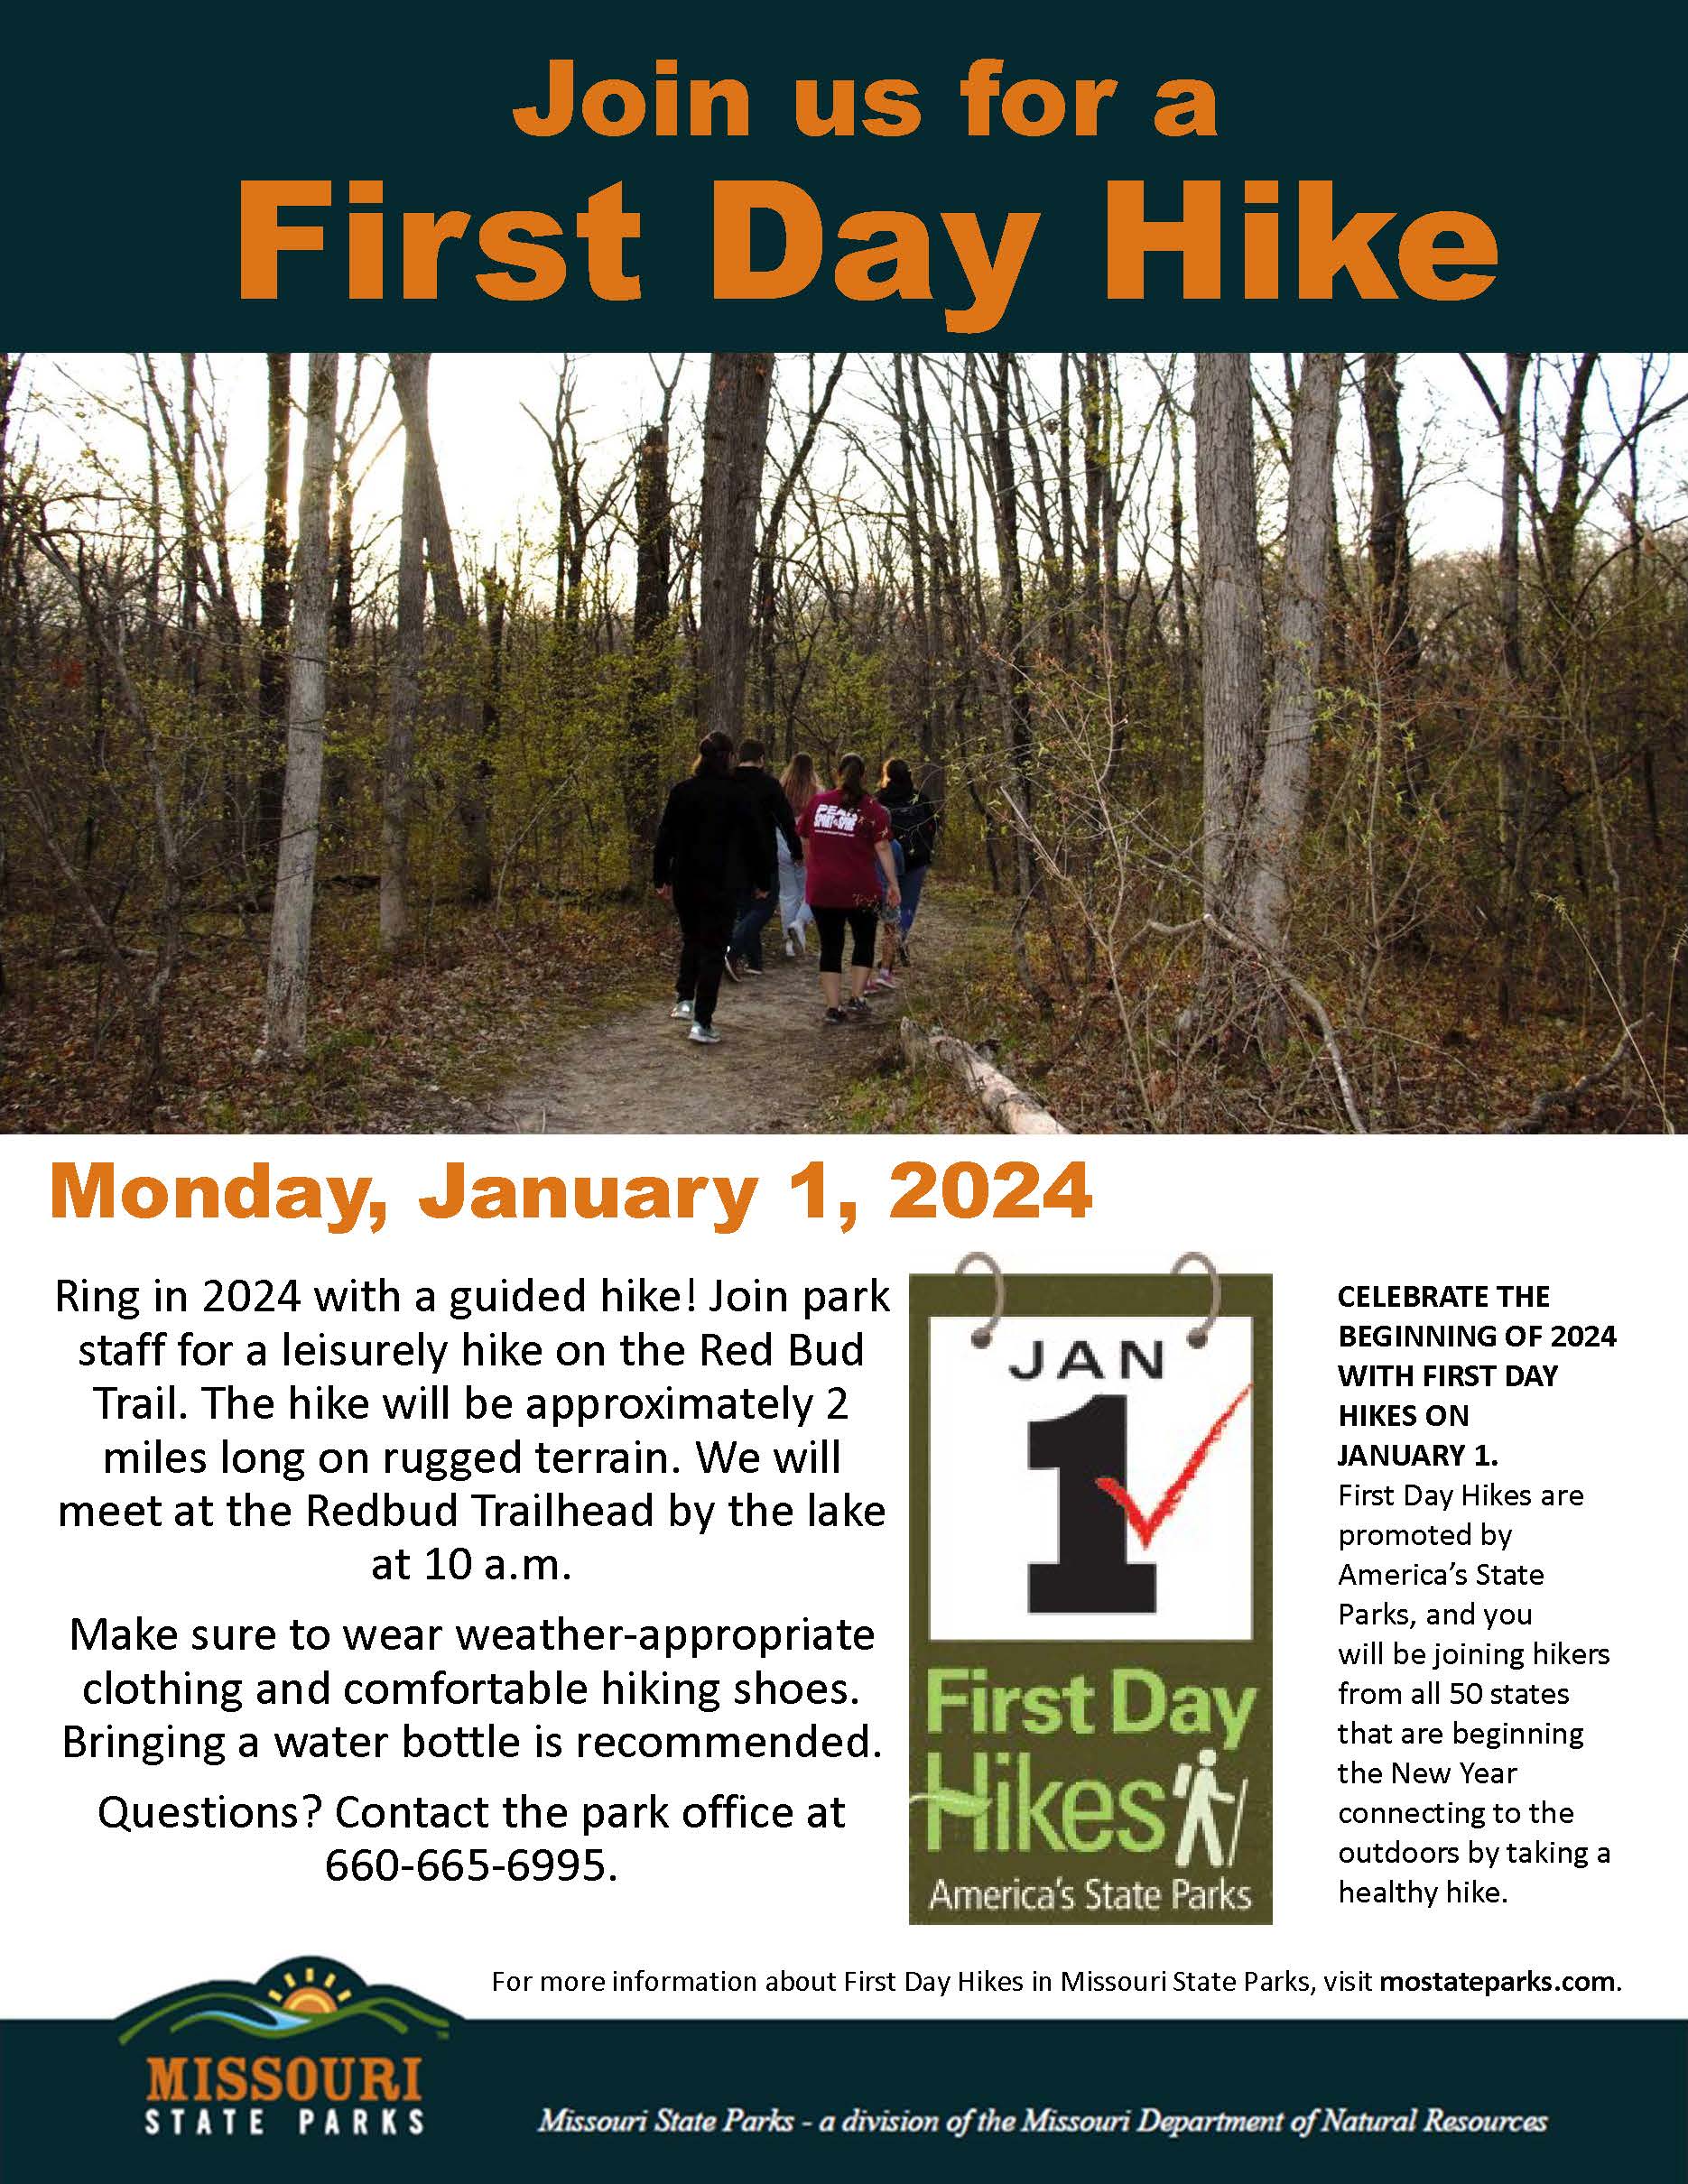 Check more about First Day Hike